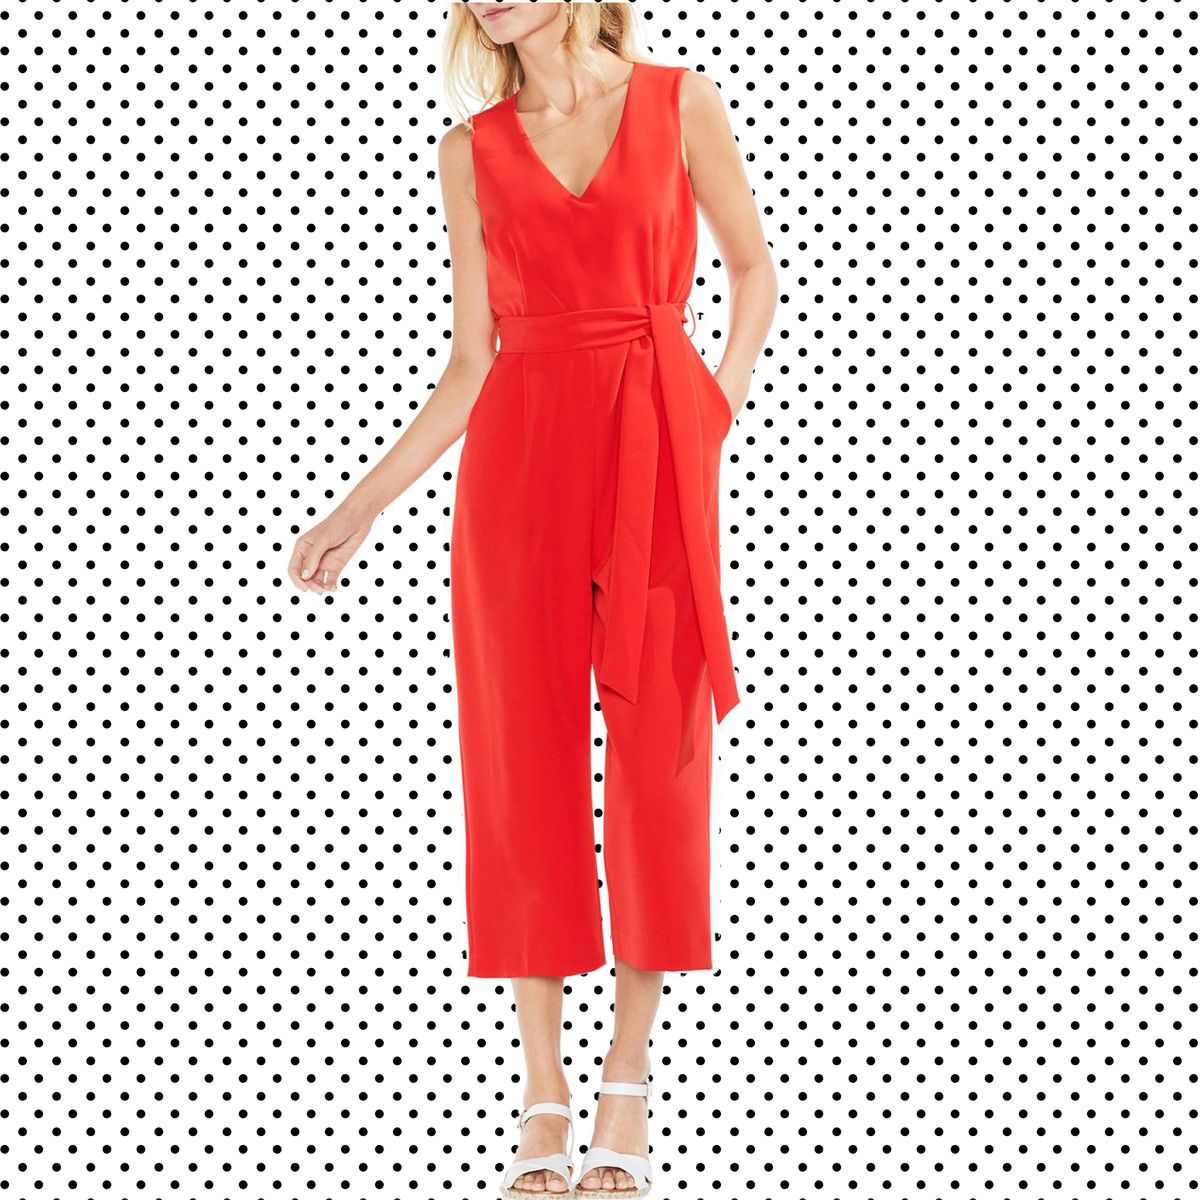 chic jumpsuits for work